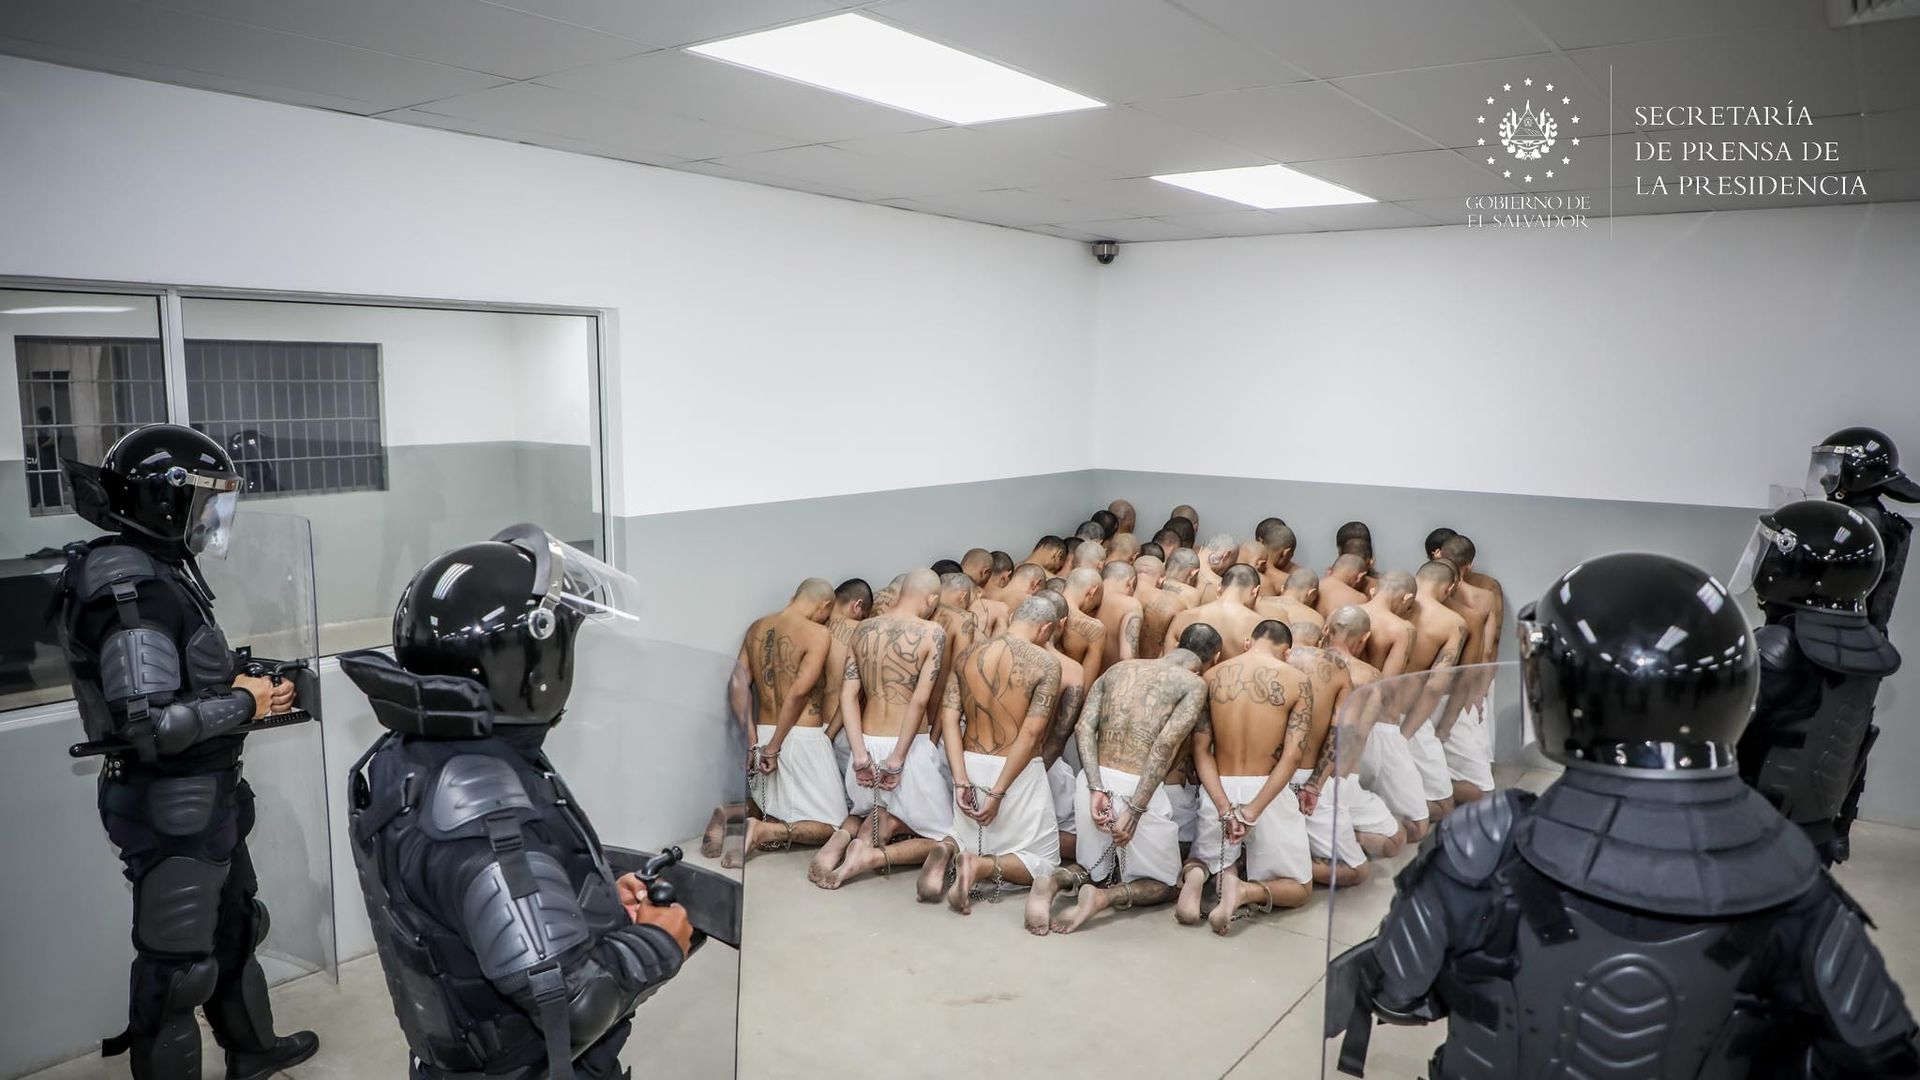 rows of shirtless Salvadoran men in white shorts are kneeled down together while wearing handcuffs as several fully armed police surround them in a prison